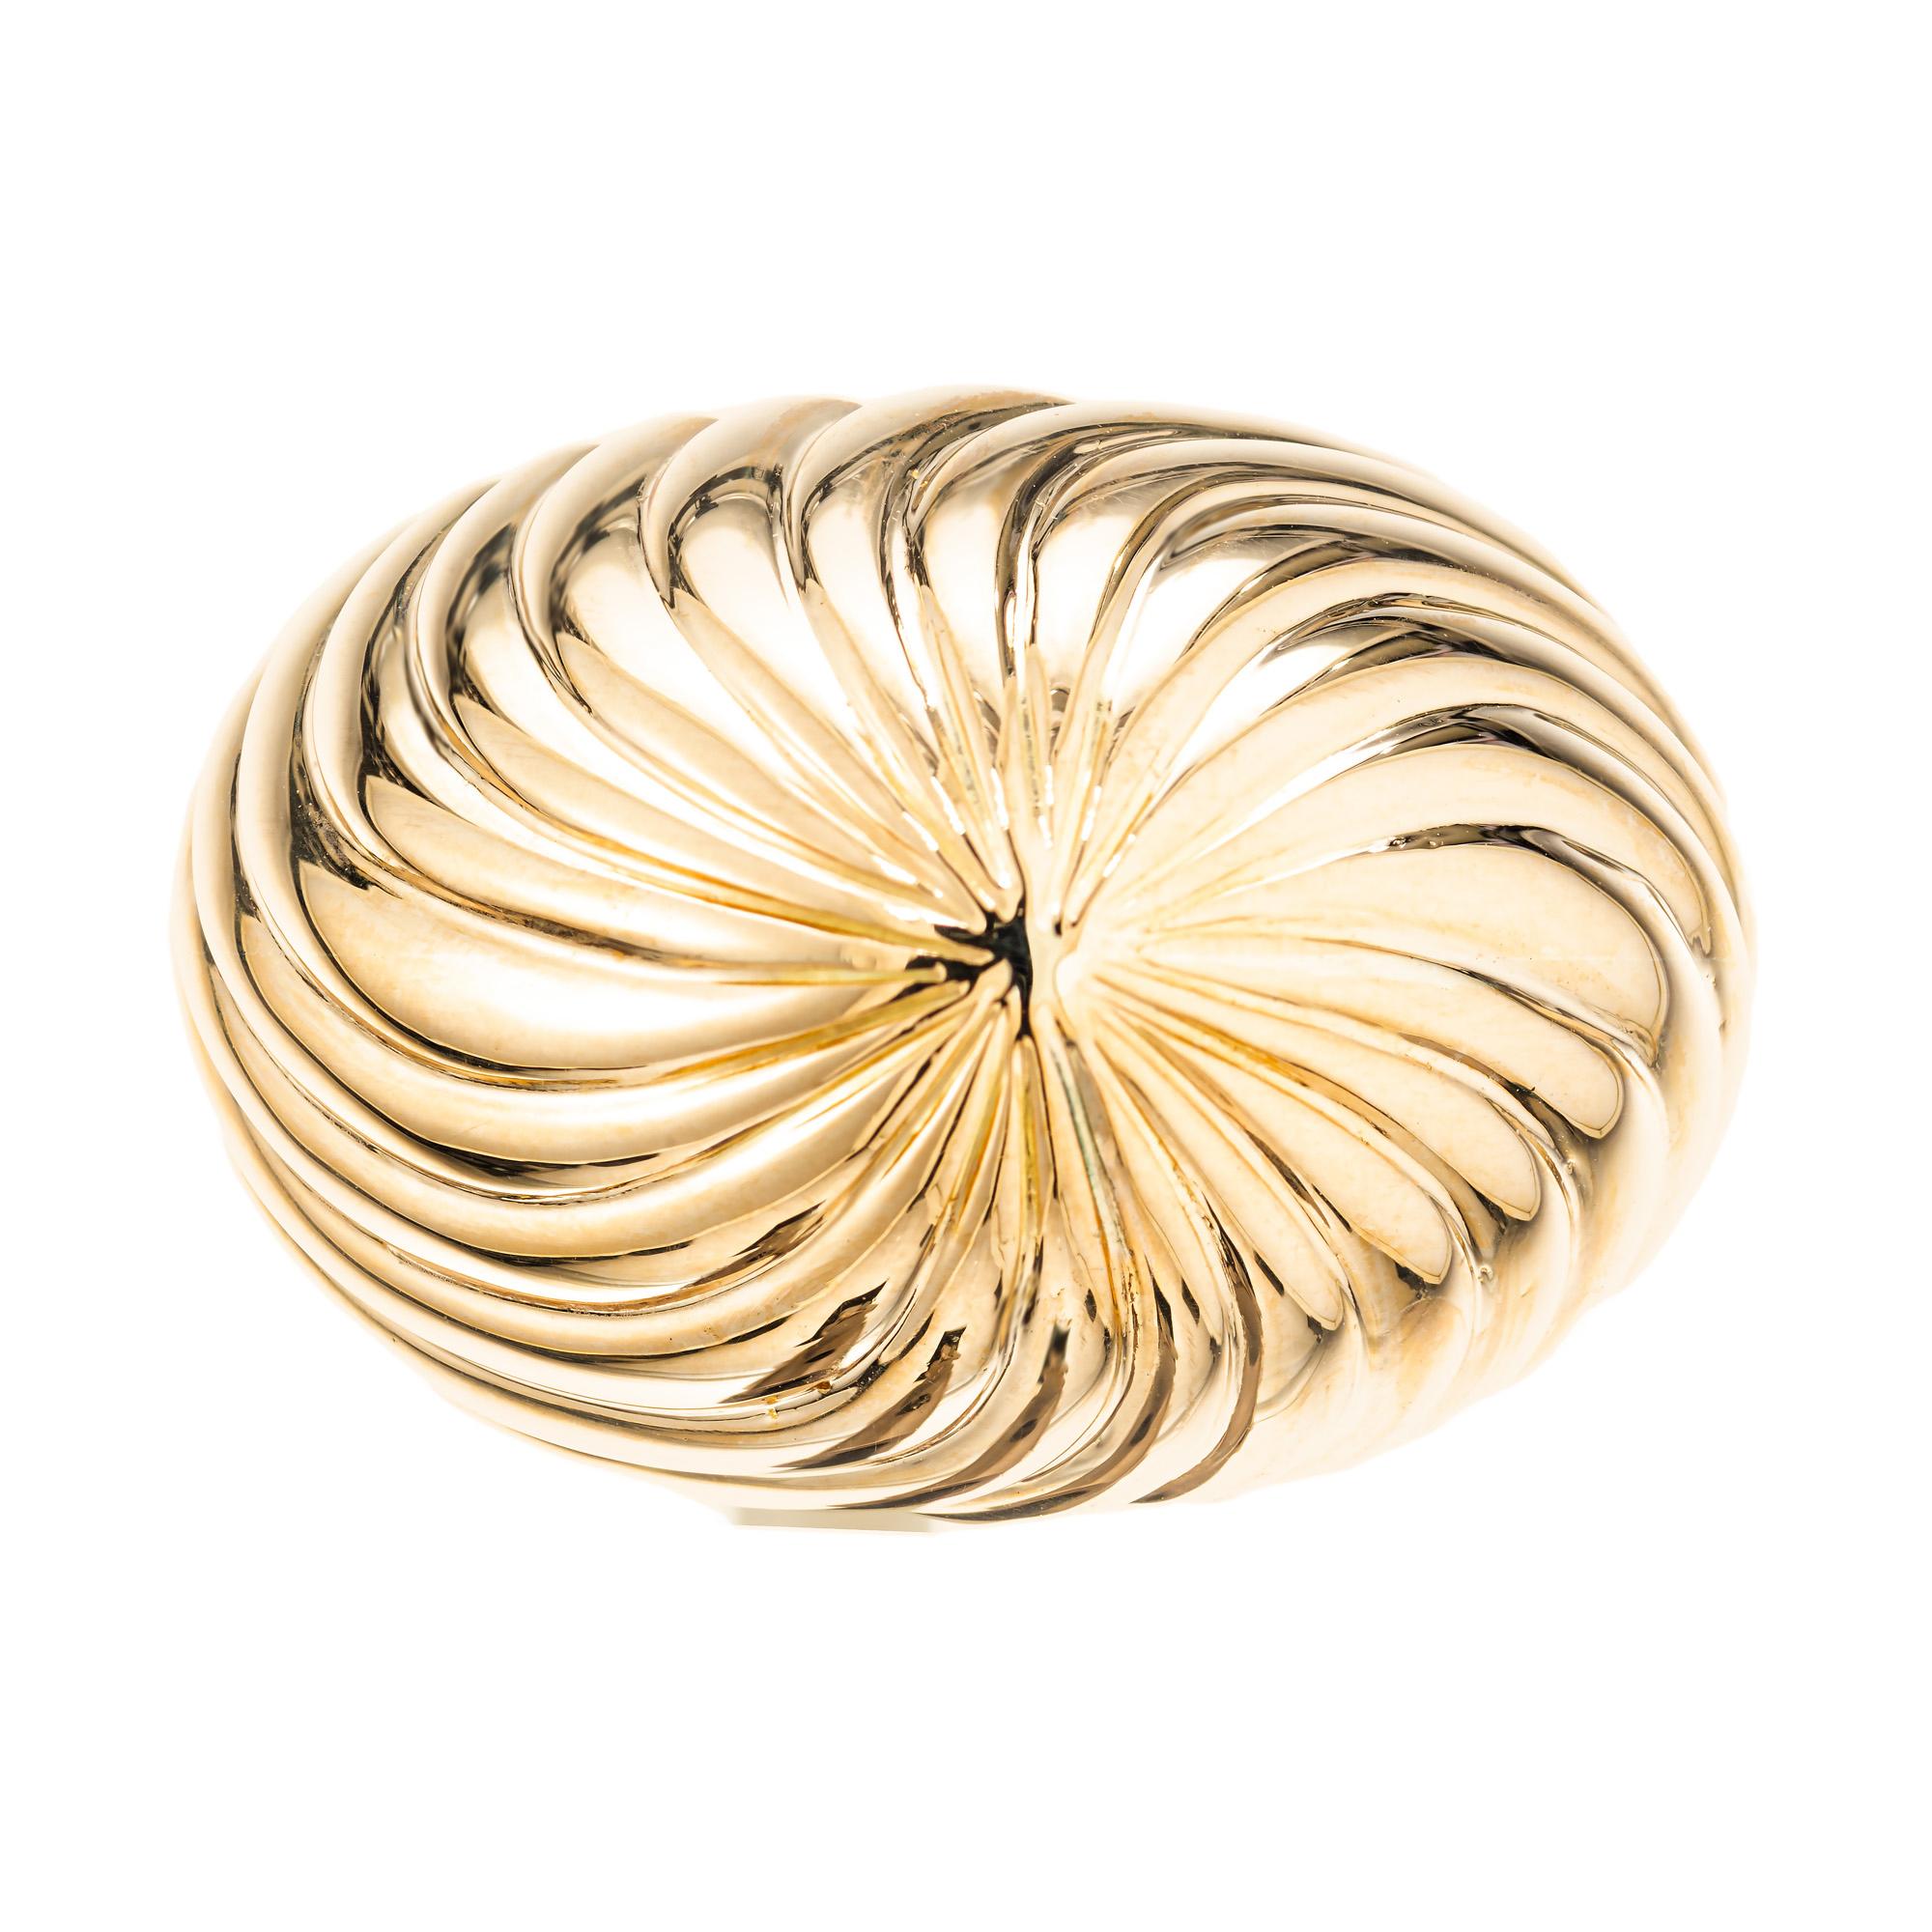 Swirl motif high dome cocktail ring, in 14k yellow gold. Perfect example of the 1960's vintage cocktail ring. Circa 1960-1970.  

Size 6.25 and sizable 
14k yellow gold 
Tested: 14k
15.6 grams
Width at top: 16.7mm
Height at top: 9.7mm
Width at